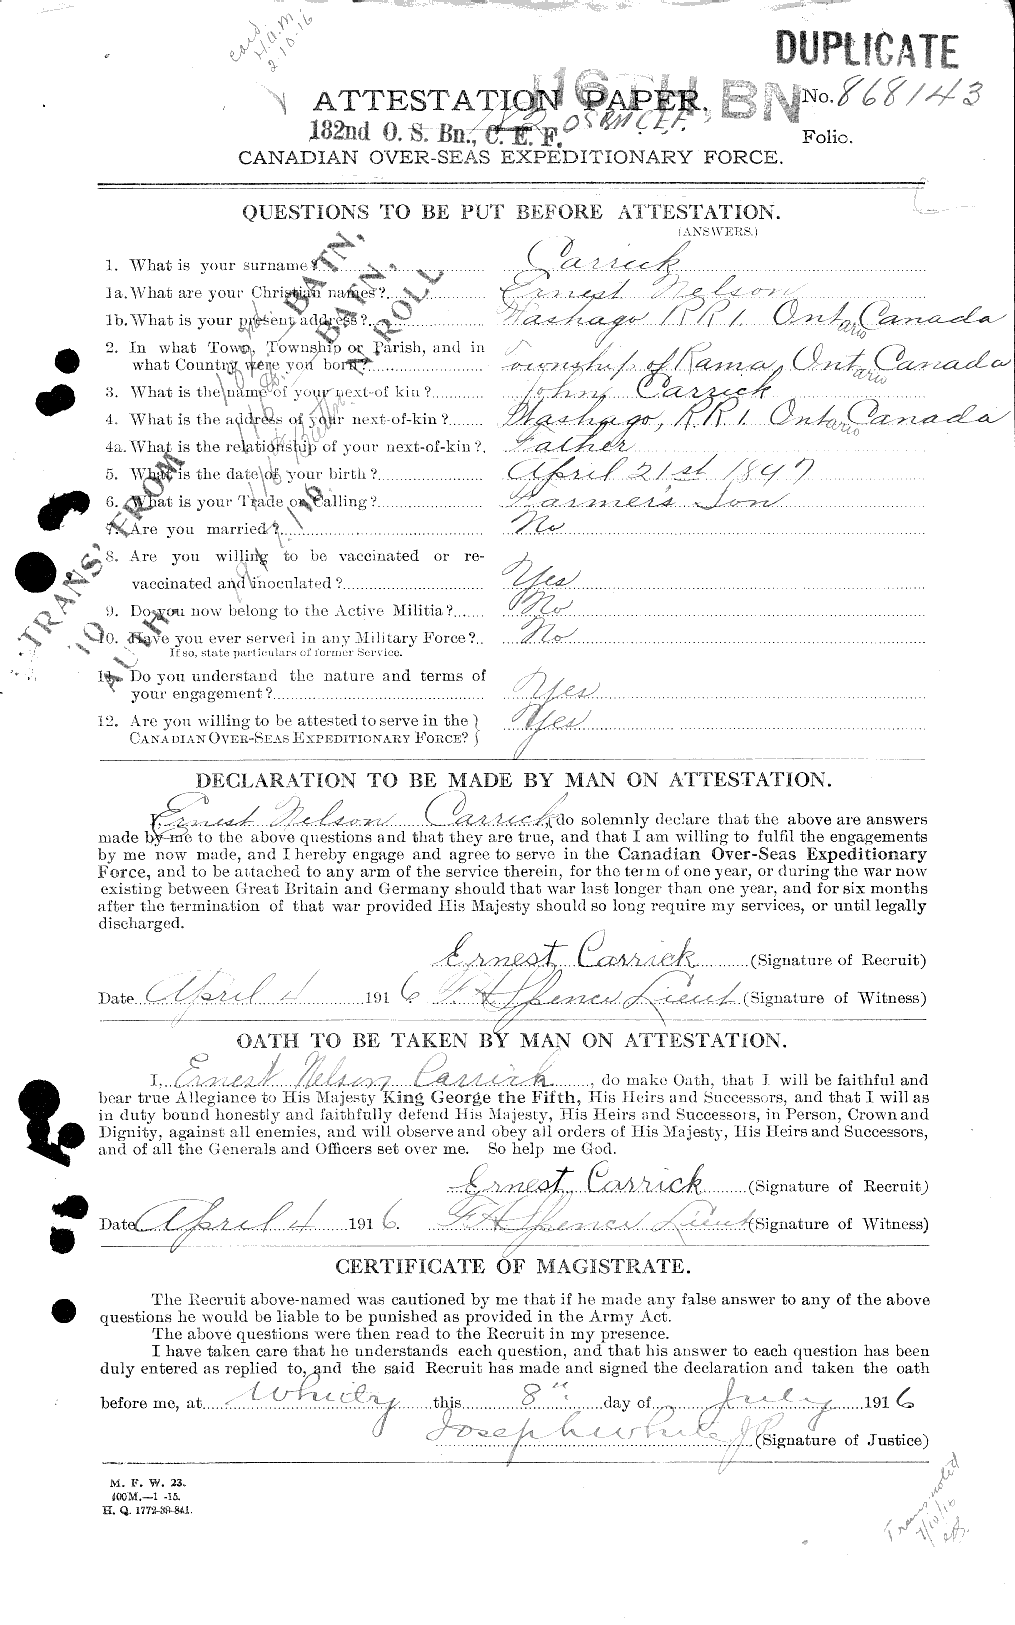 Personnel Records of the First World War - CEF 010477a